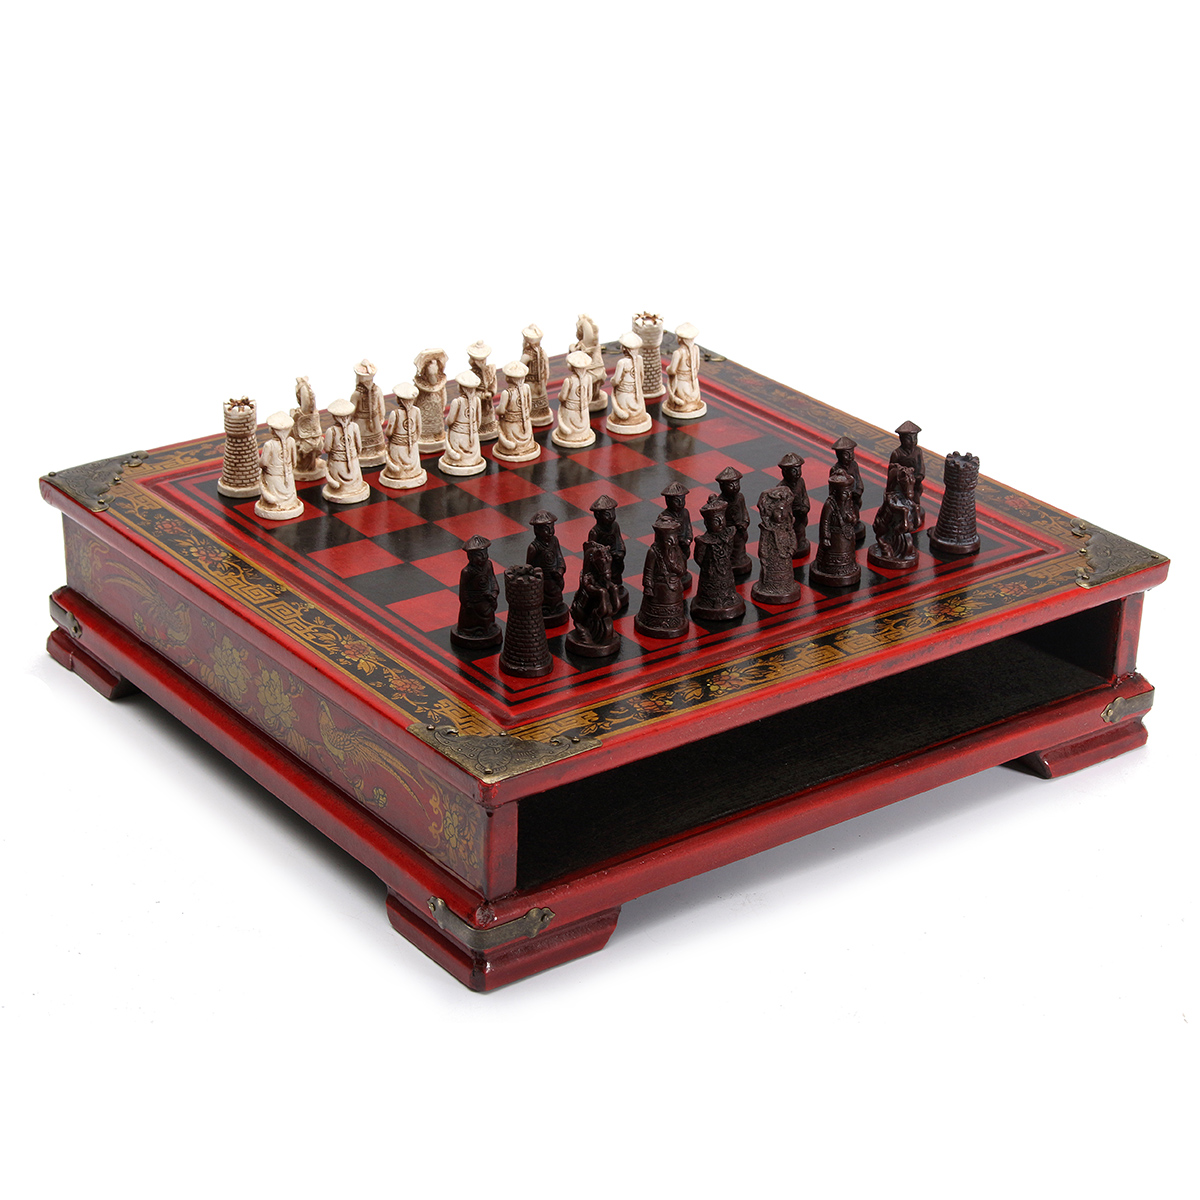 32PcsSet-Resin-Chinese-Chess-With-Coffee-Wooden-Table-Vintage-Collectibles-Gift-1108169-1